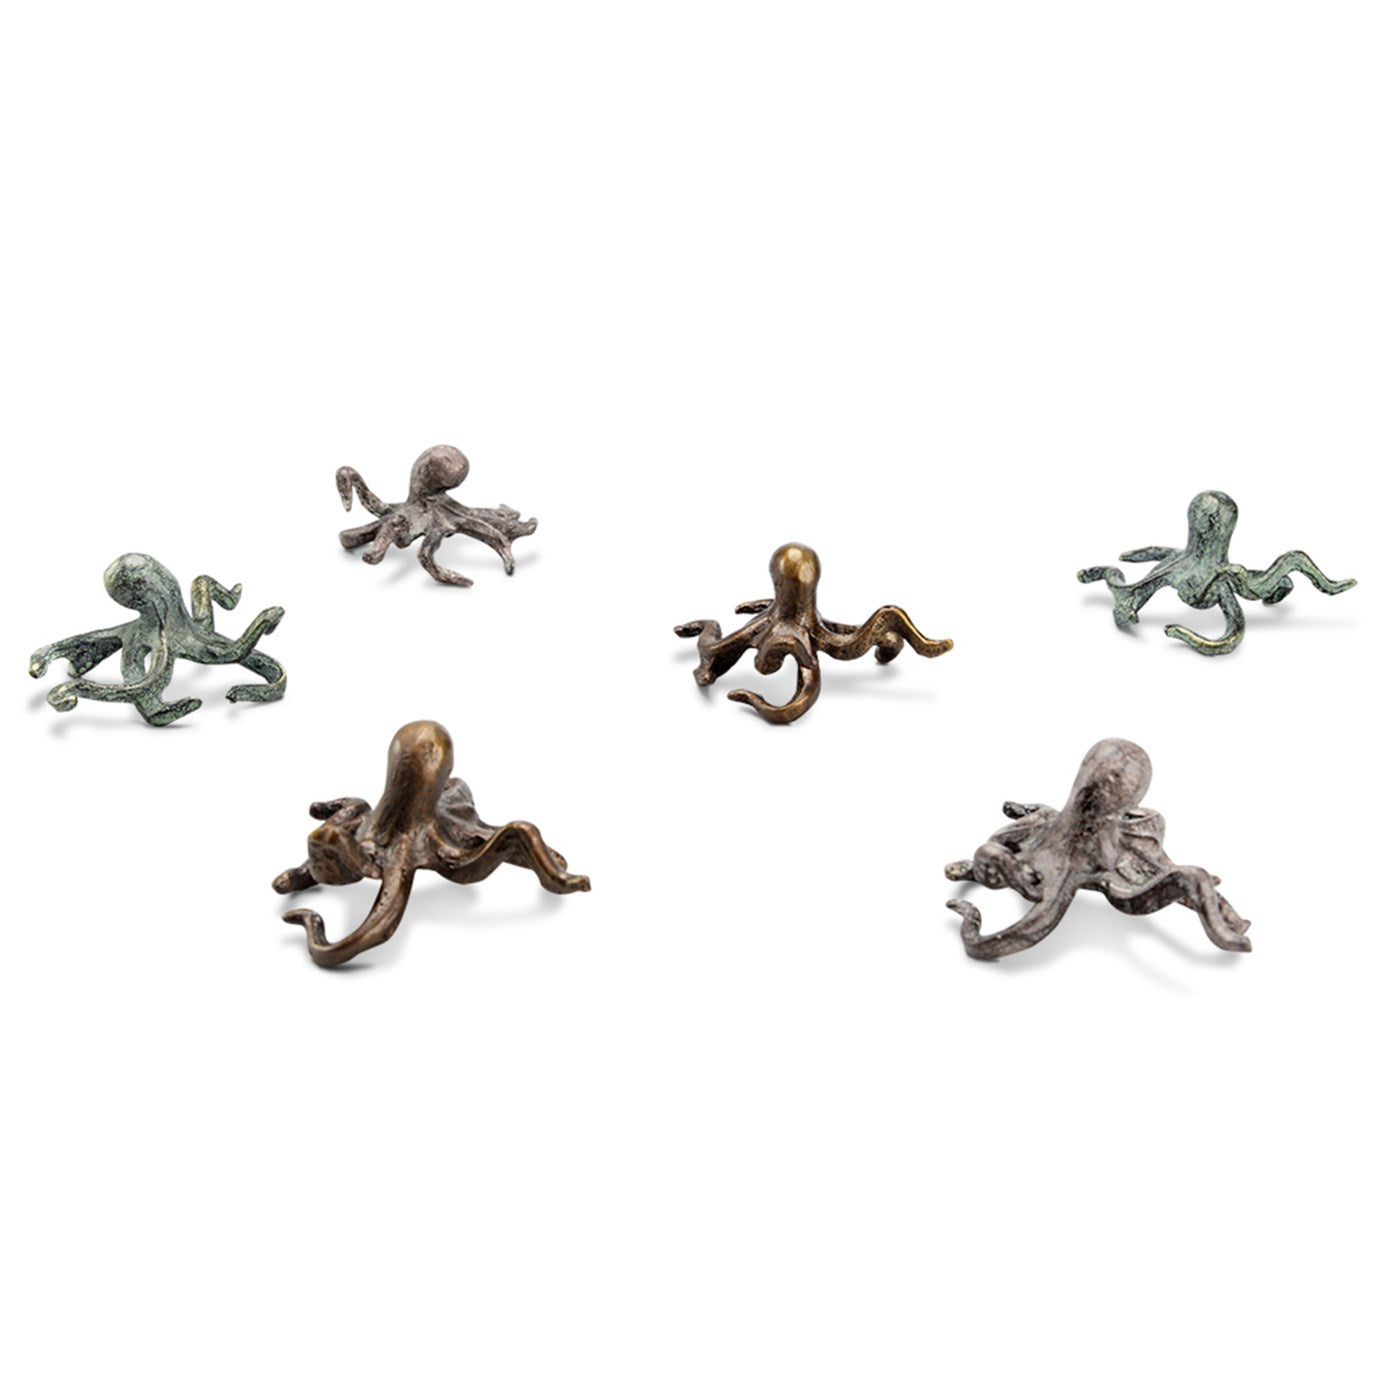 Octopus Minimals Set of 6 By SPI Home